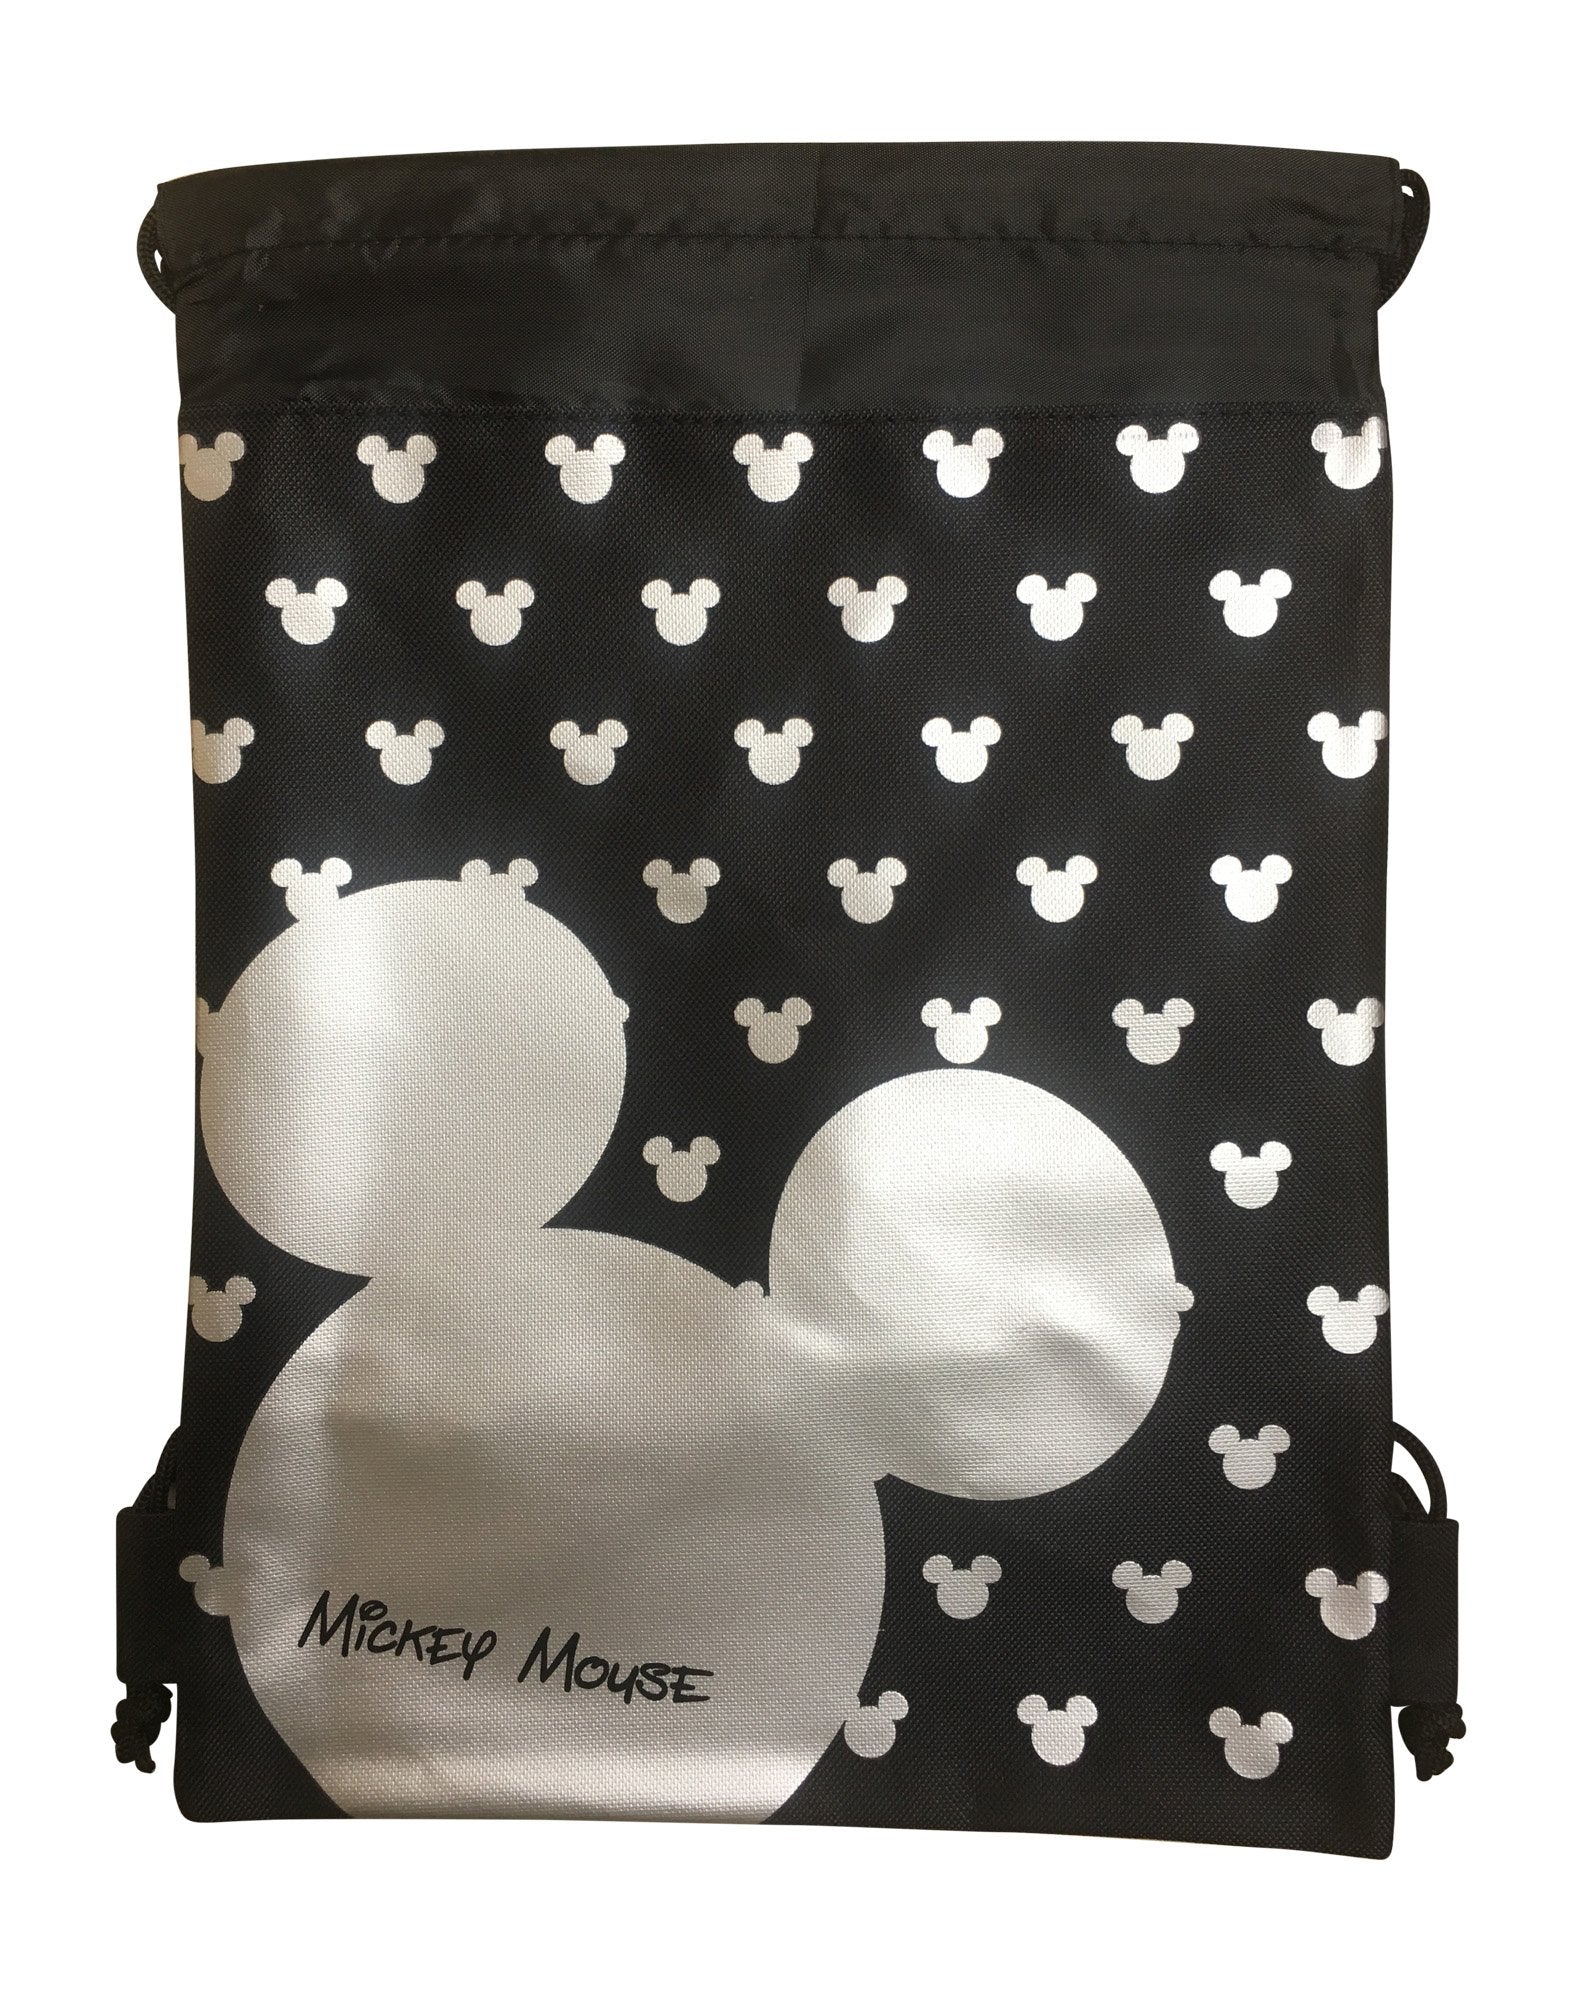 Disney Mickey Mouse Drawstring Backpack Bag Pack of 2